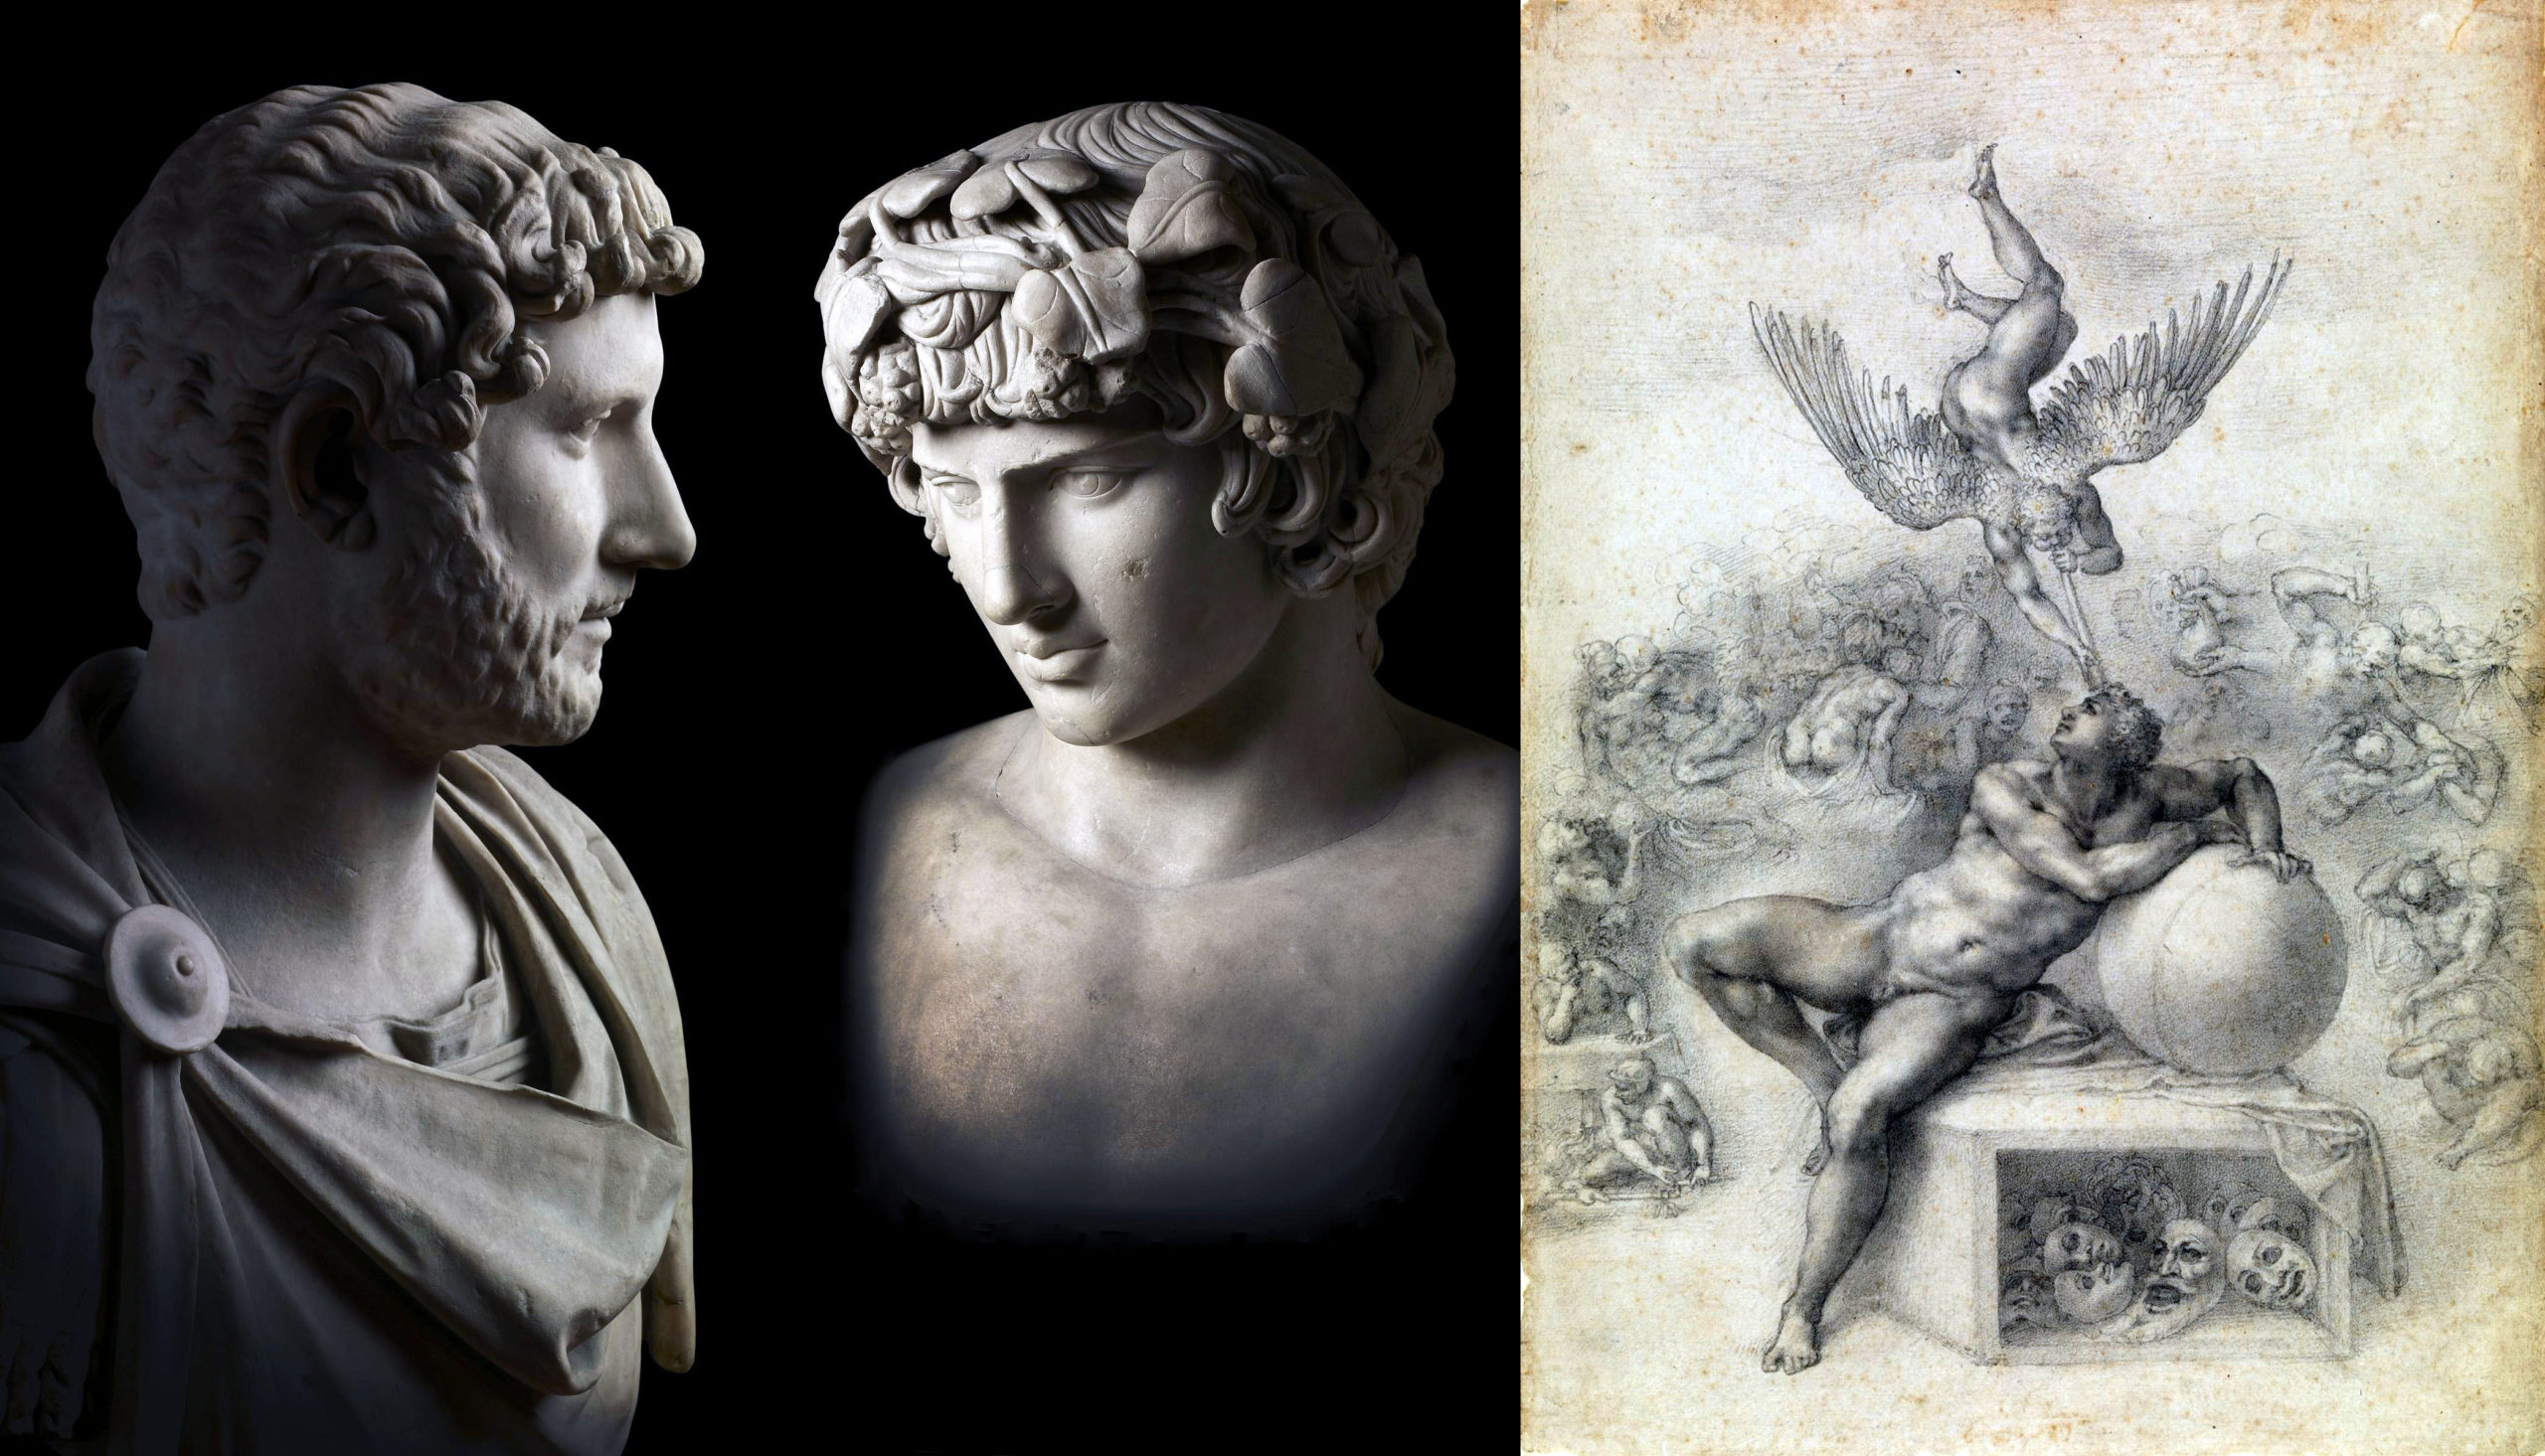 Left: Hadrian and Antinous, marble, 130–140 C.E., found Janiculine Hill (Rome) (© Trustees of The British Museum); right: Michelangelo, The Dream of Human Life, about 1533 (London, The Courtauld Institute of Art)